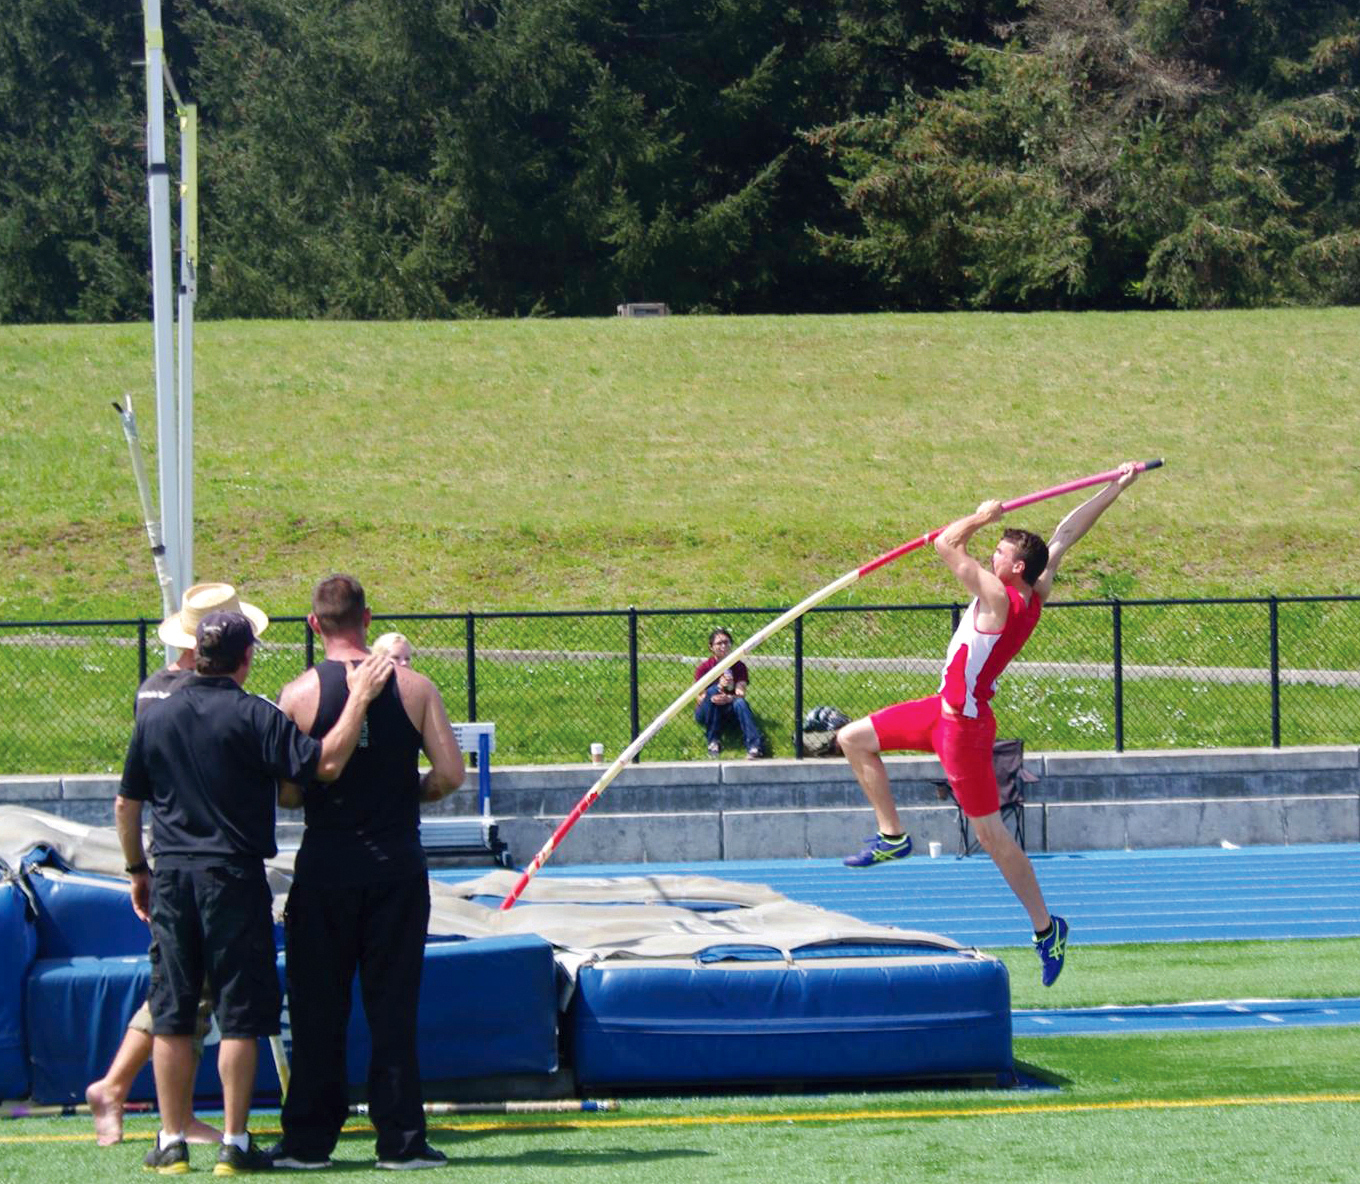 Jayson Brocklesby takes off on his personal-record setting pole vault of 12 feet